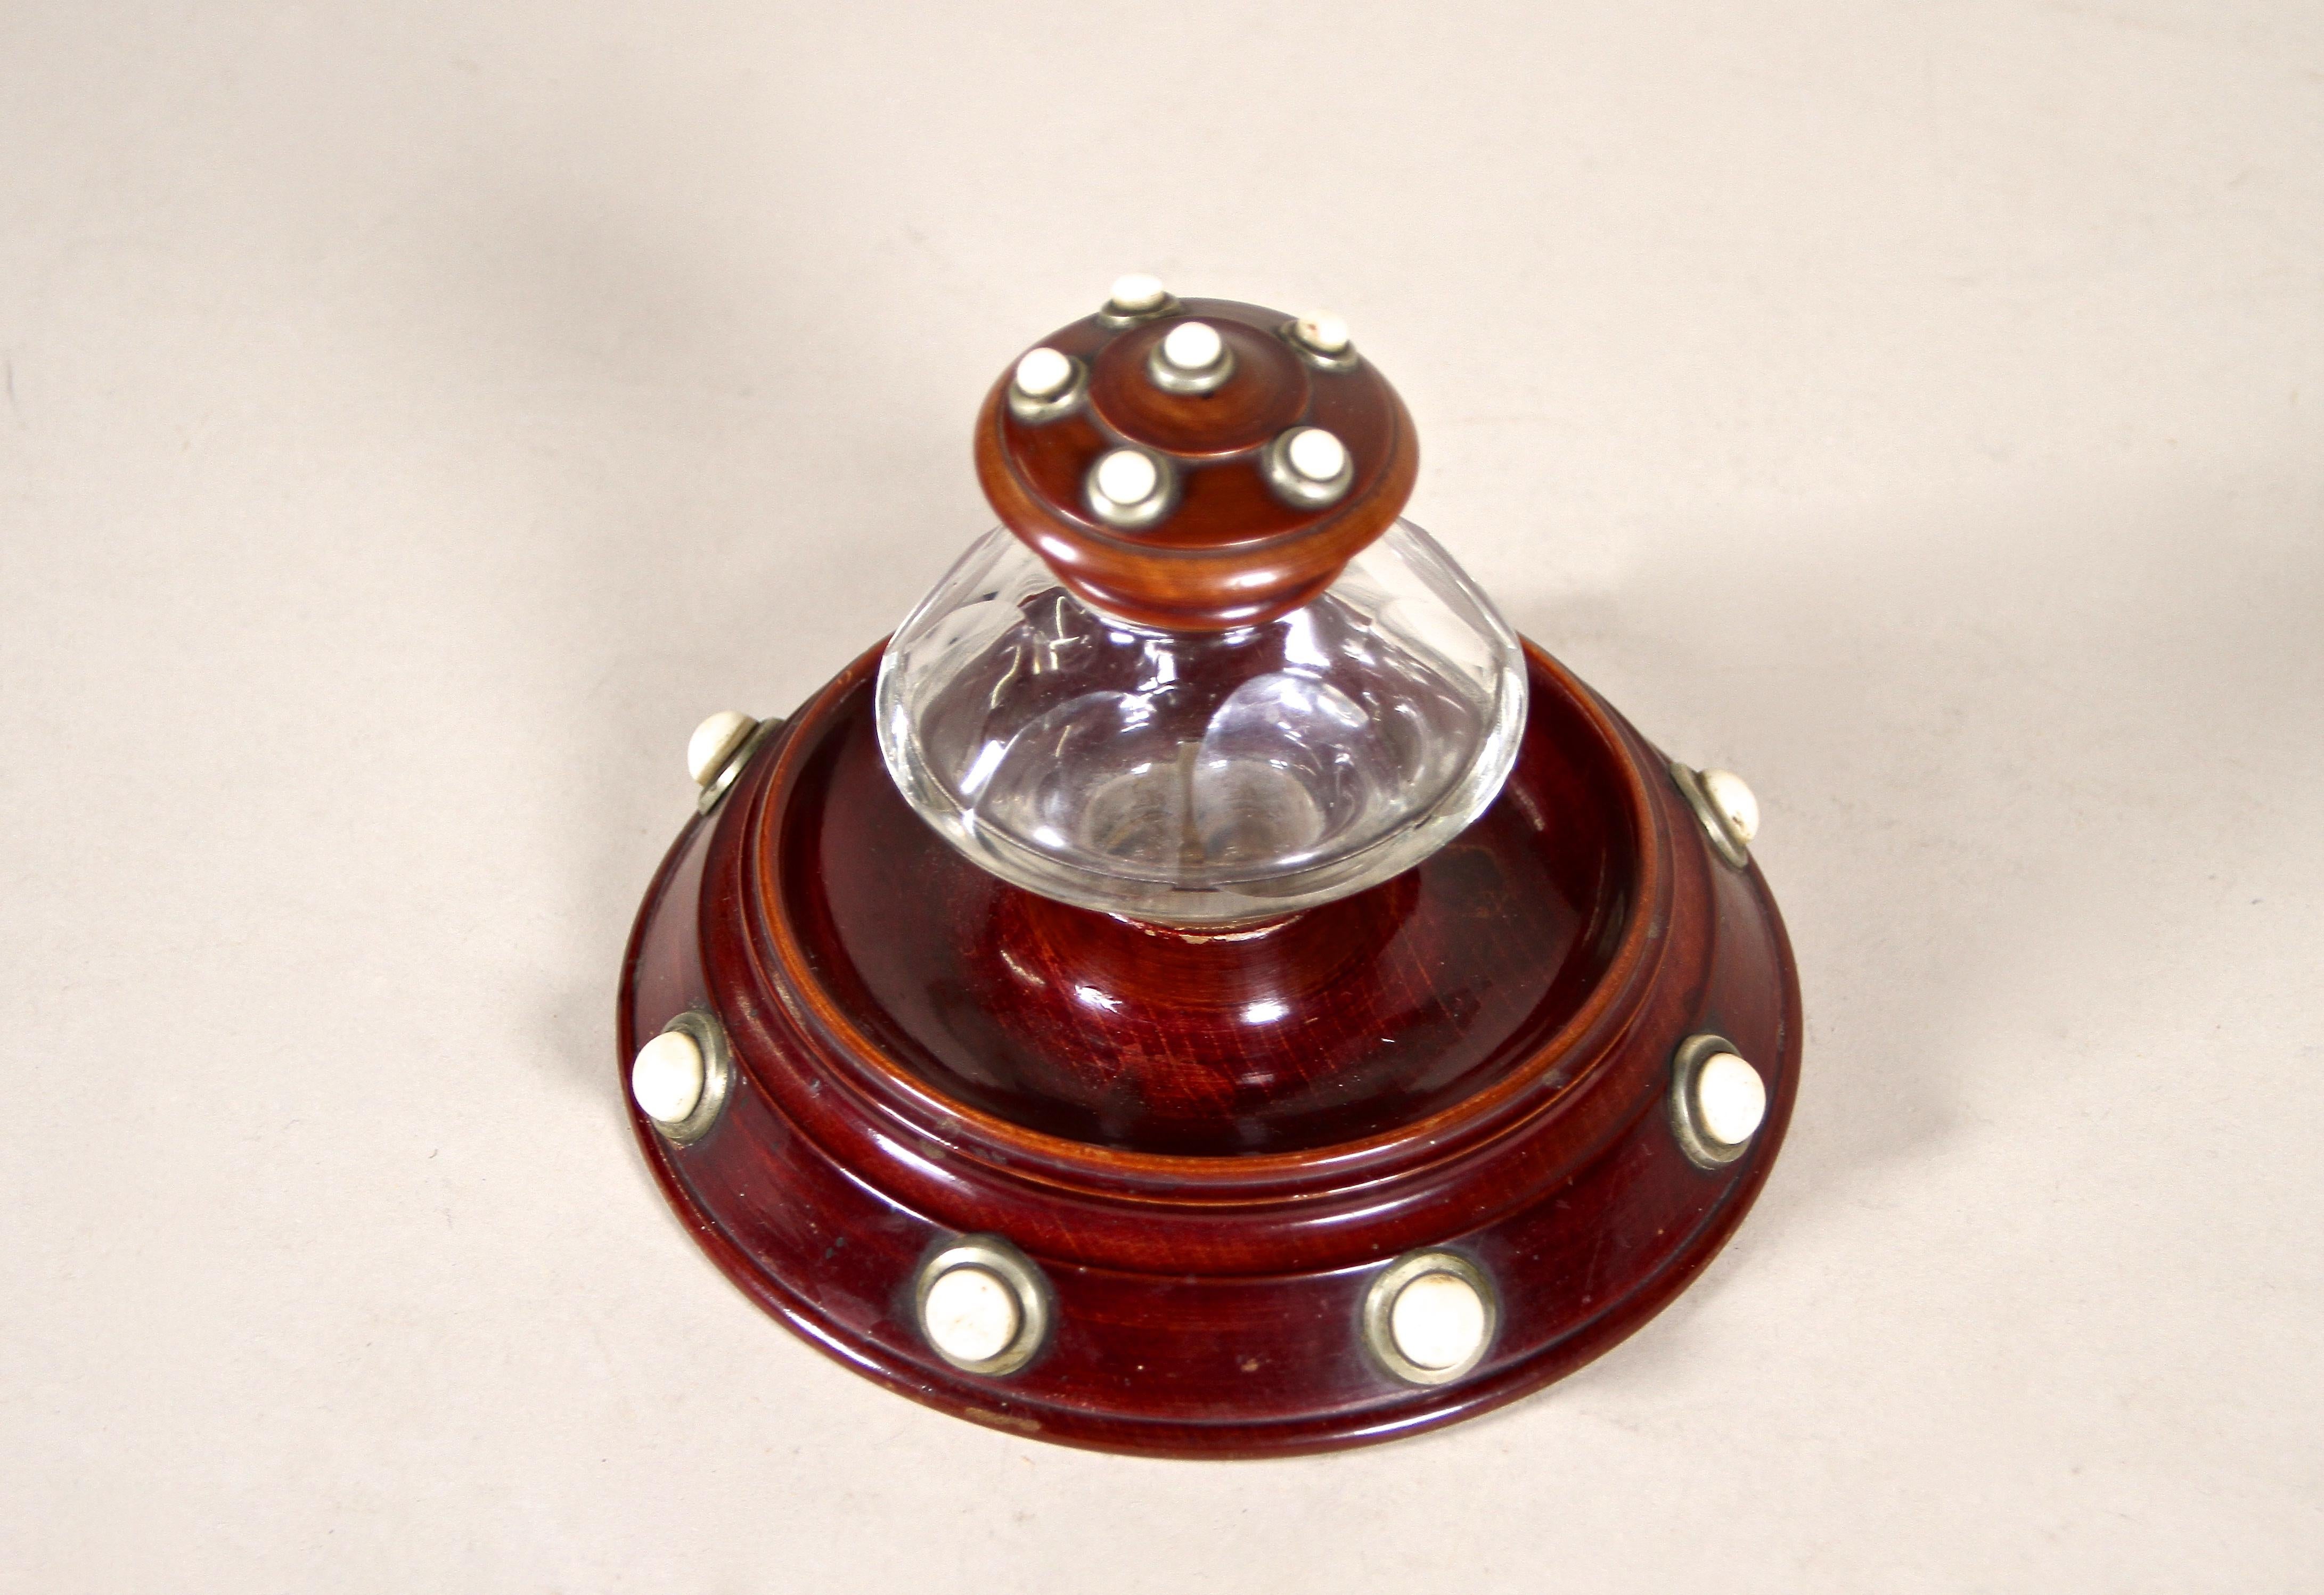 20th Century Art Nouveau Wooden Inkwell with Porcelain Knobs, Austria, circa 1900